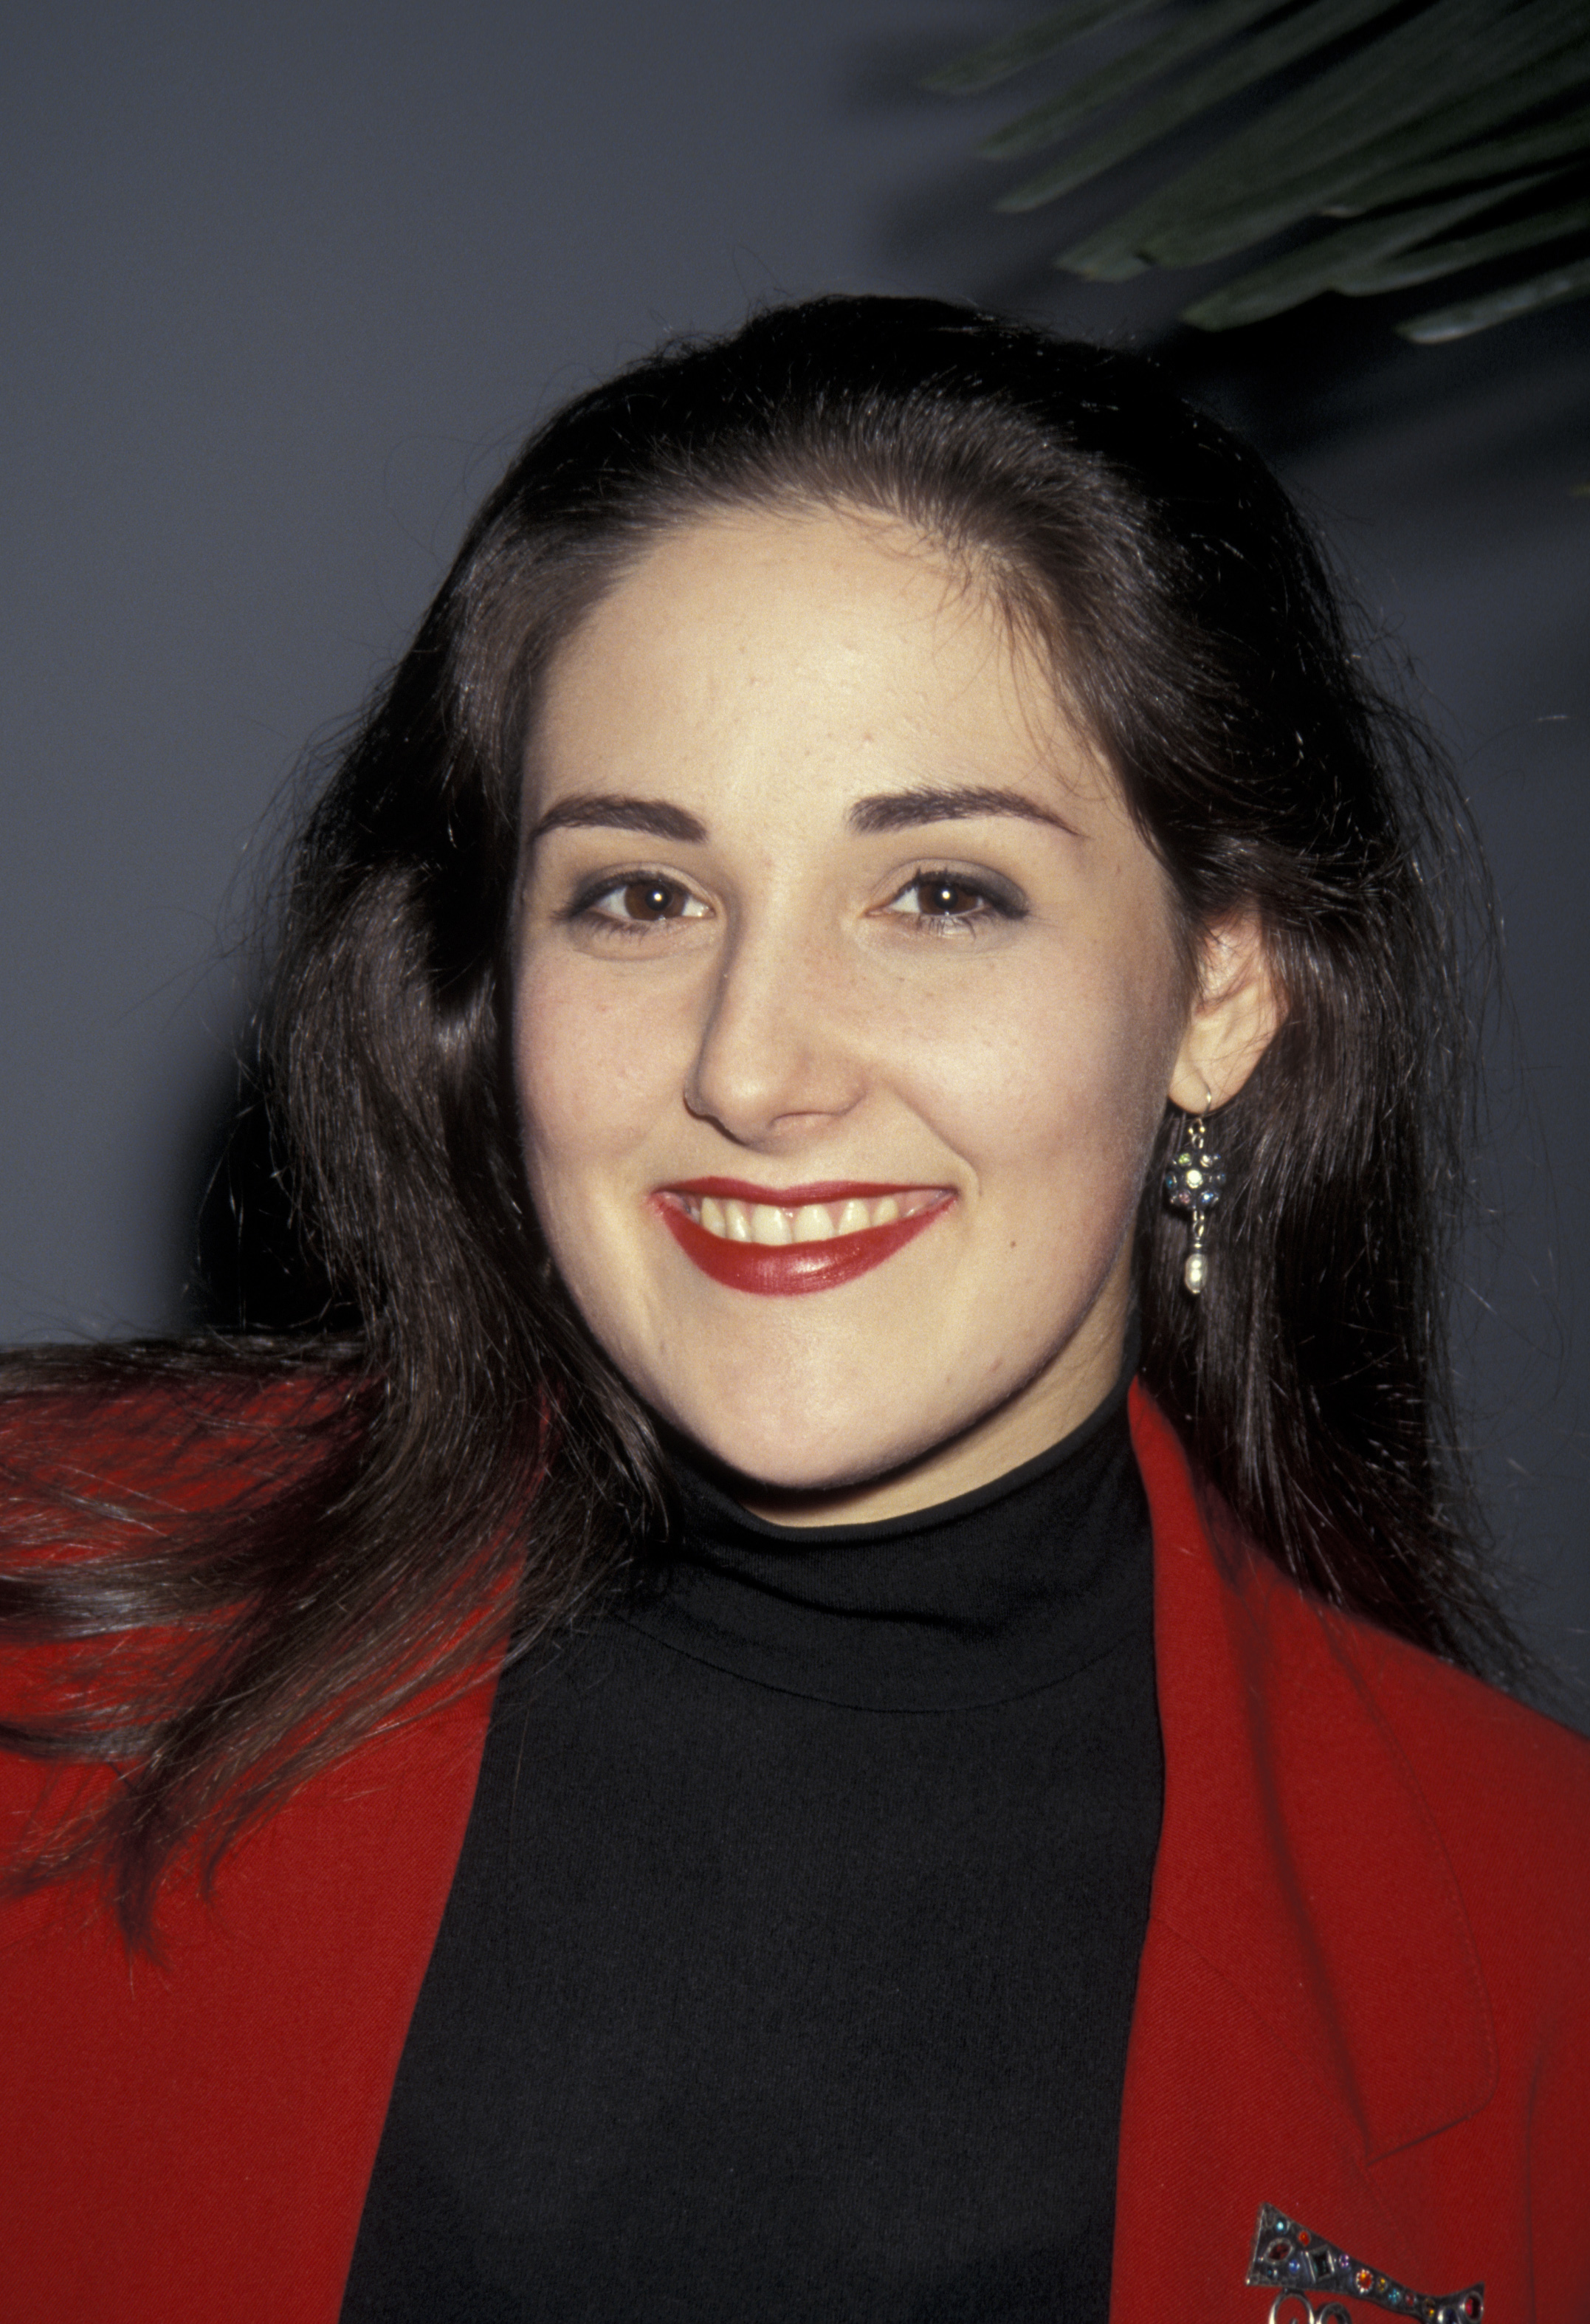 Ricki Lake during the National Association of Television Program Executives Convention in San Francisco, California in 1993. | Source: Getty Images